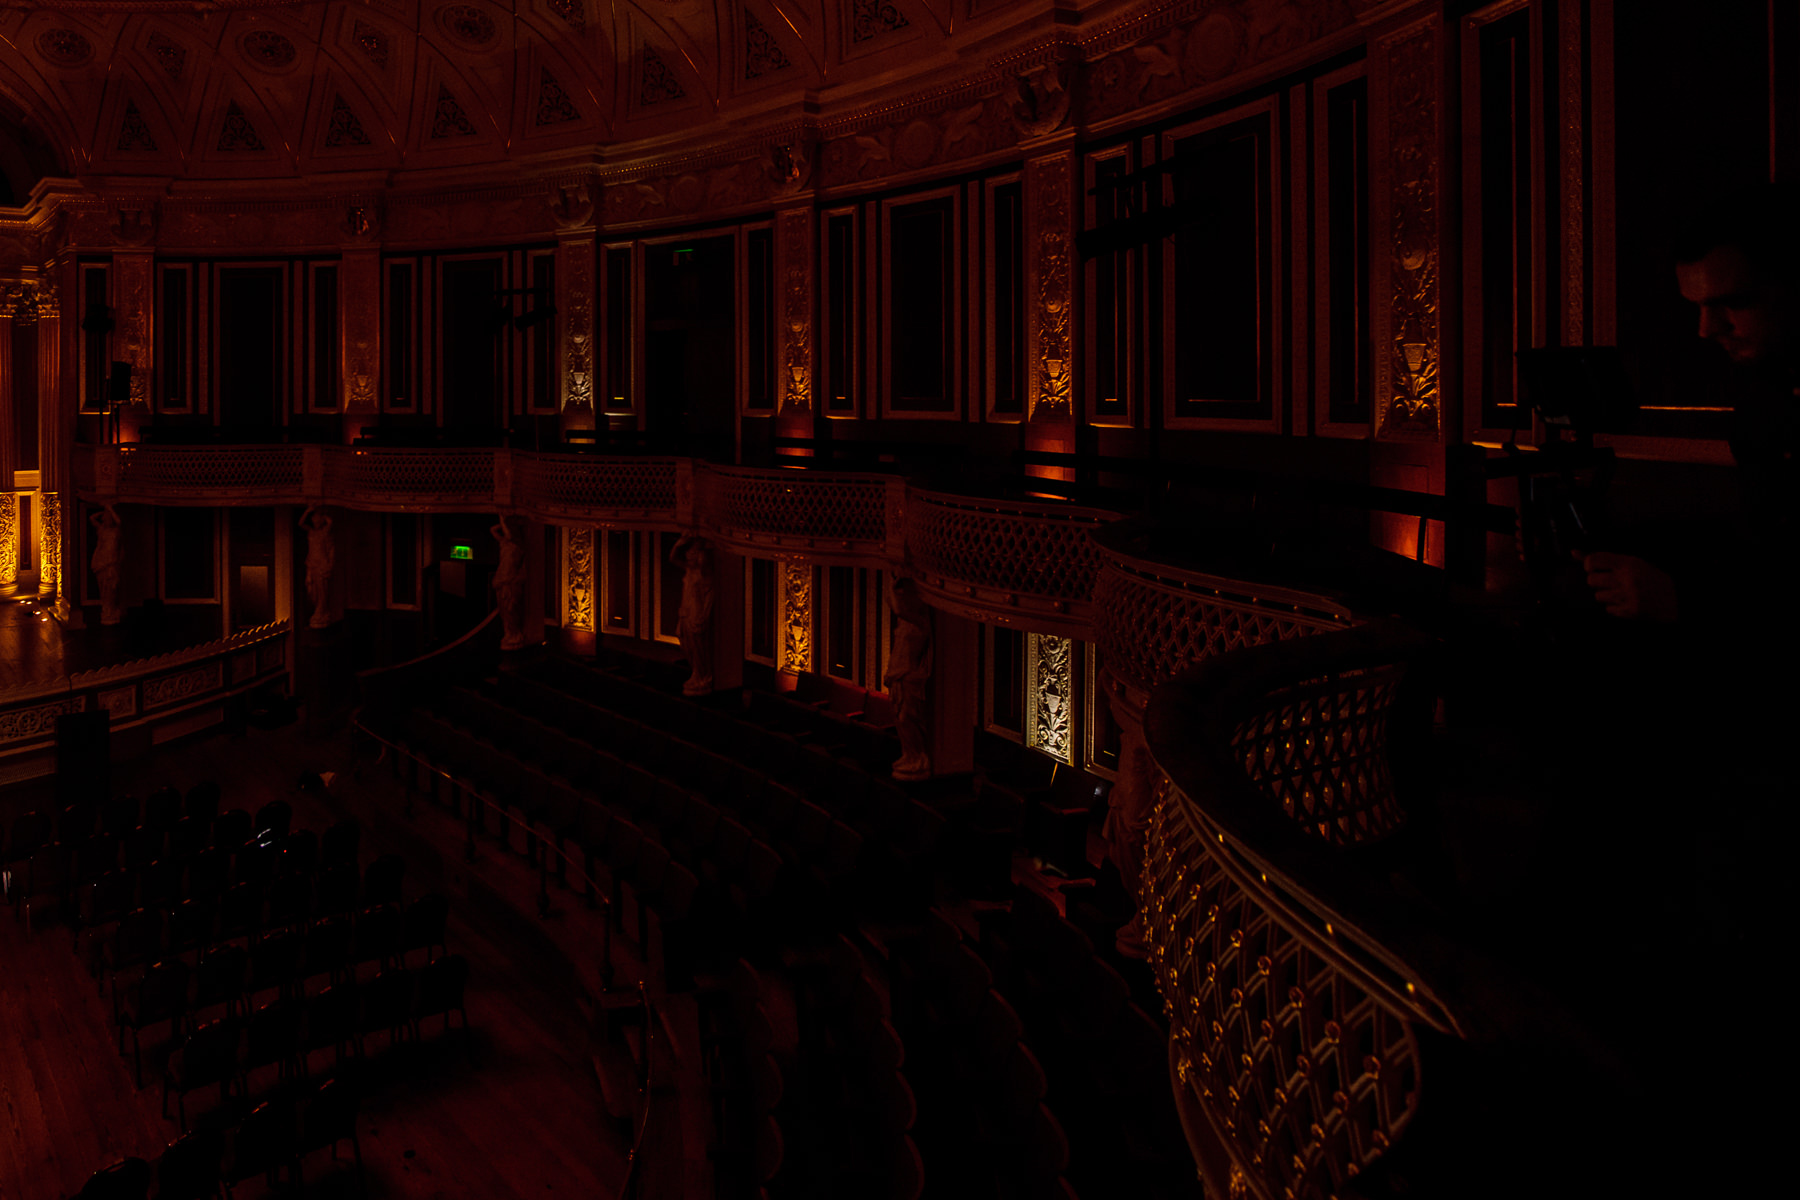 panorama, photomerge in lightroom, st georges hall 